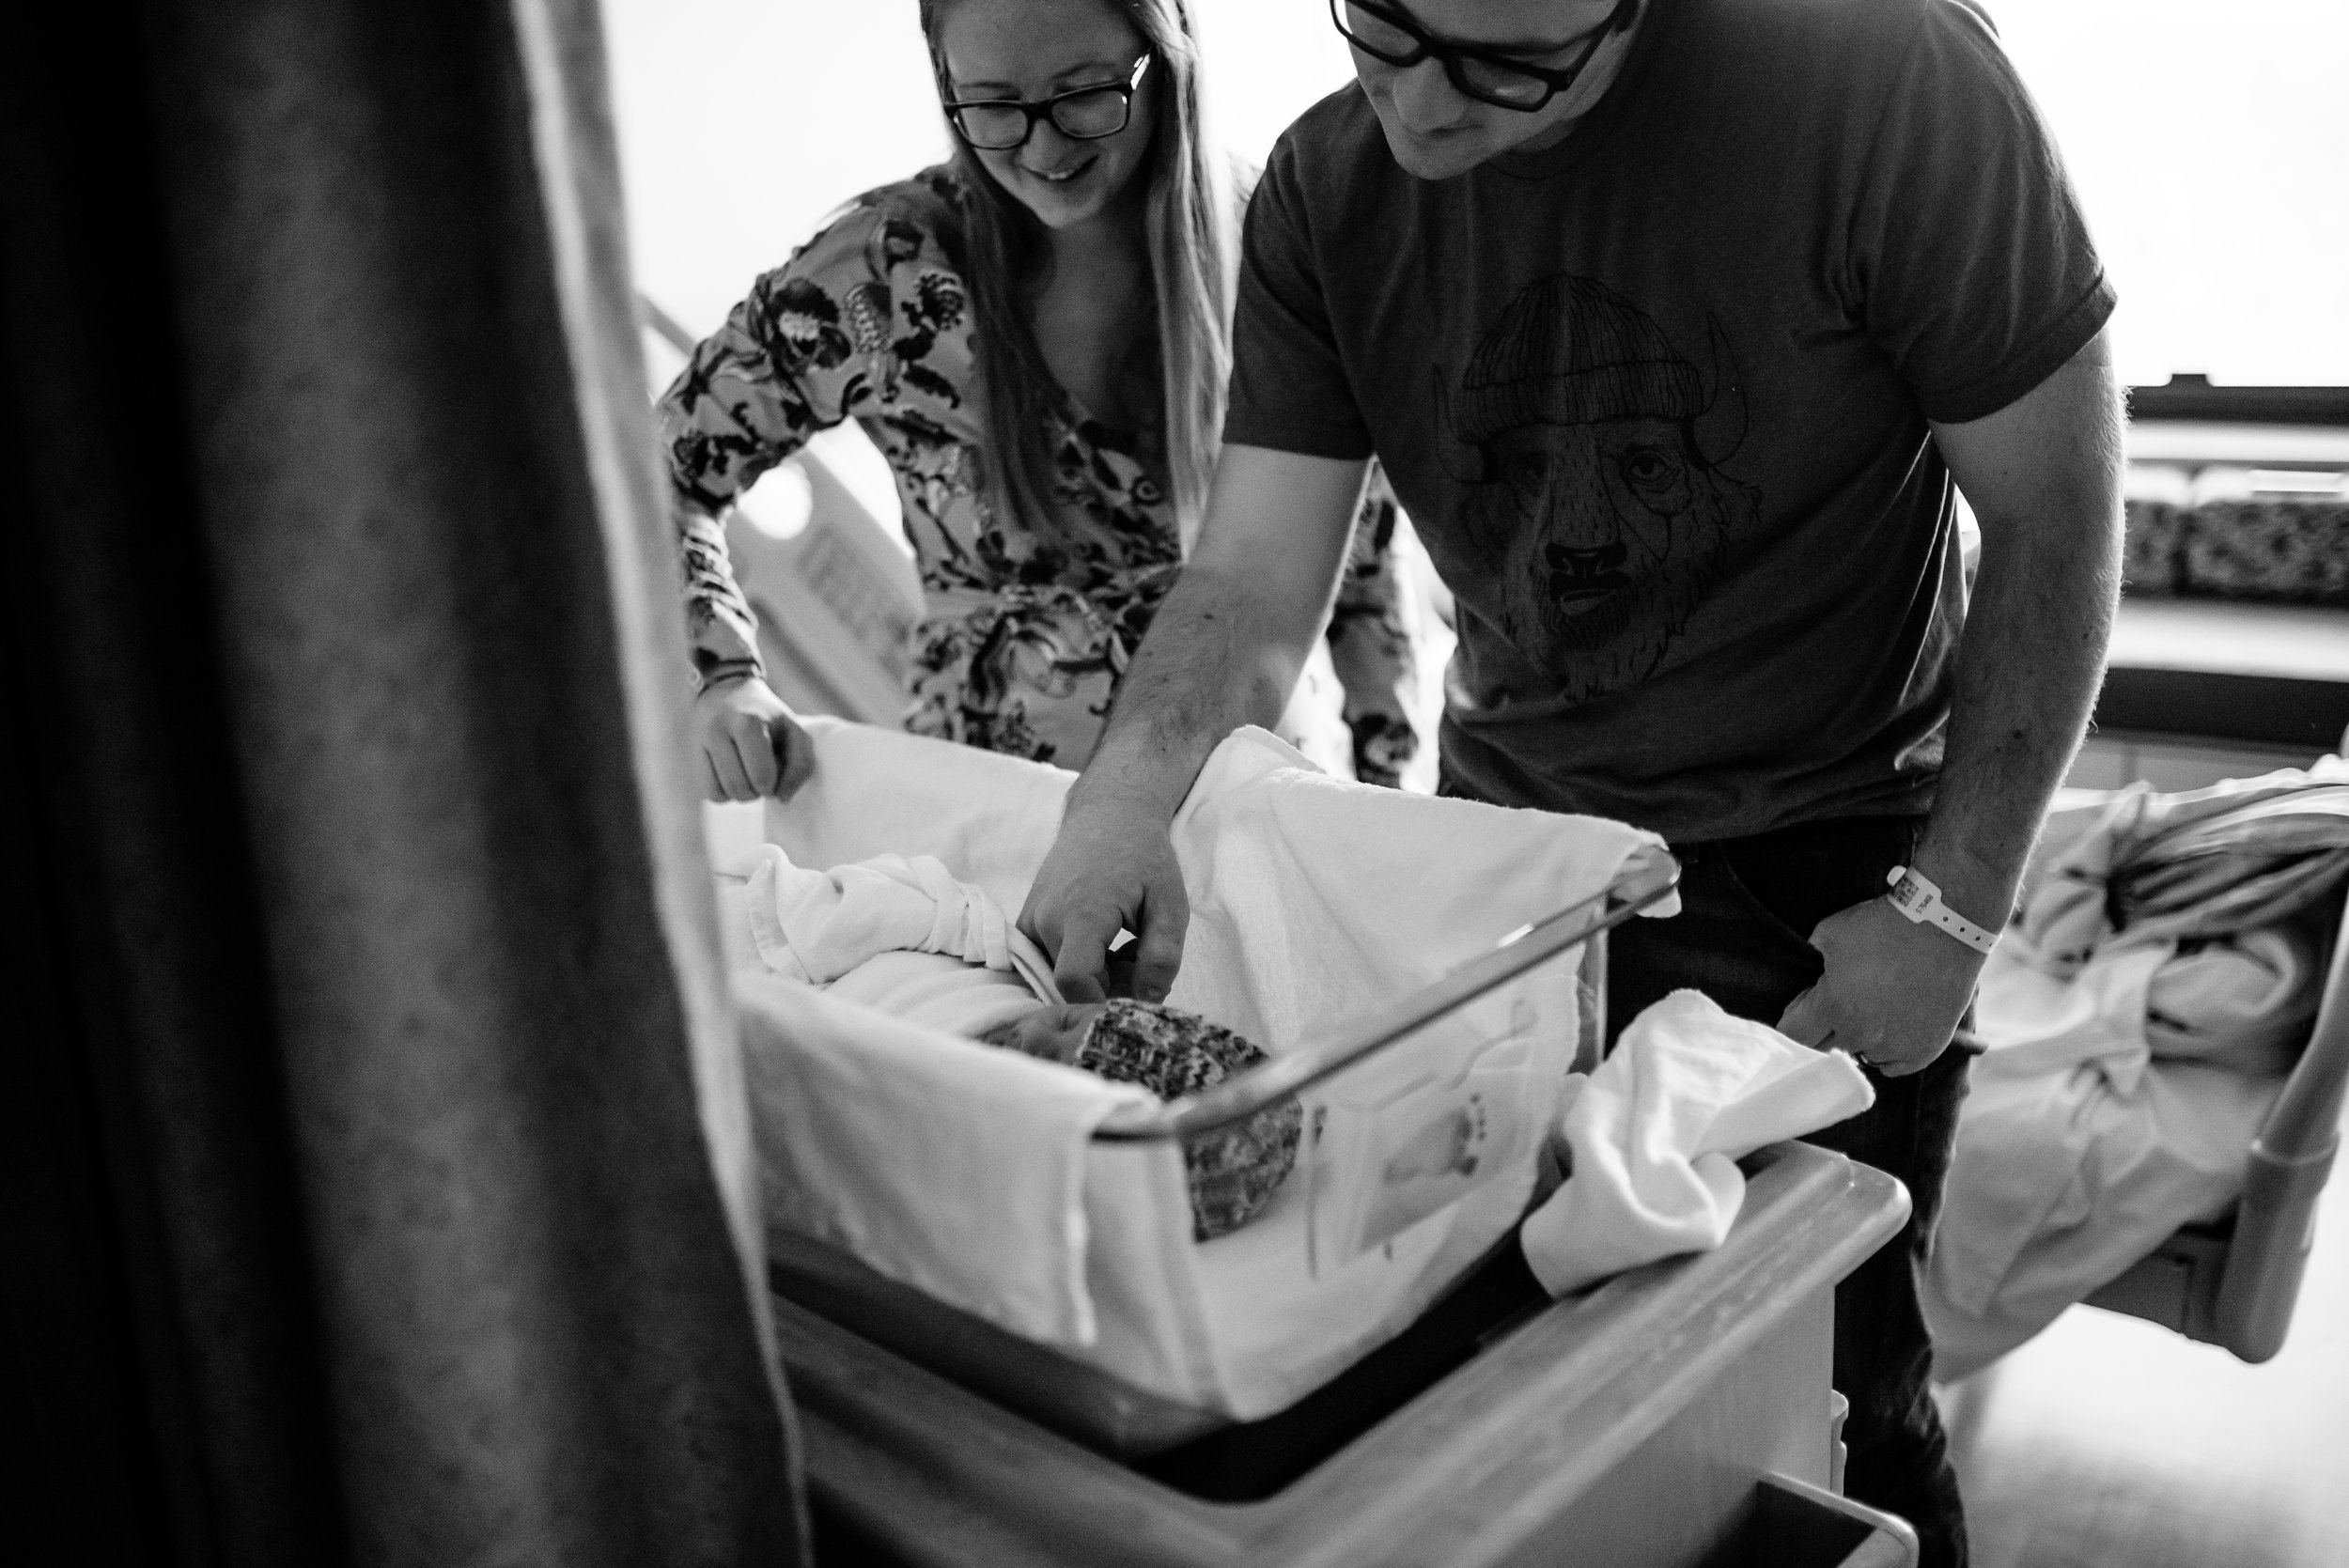 Mom and Dad smile at newborn son in hospital bassinet